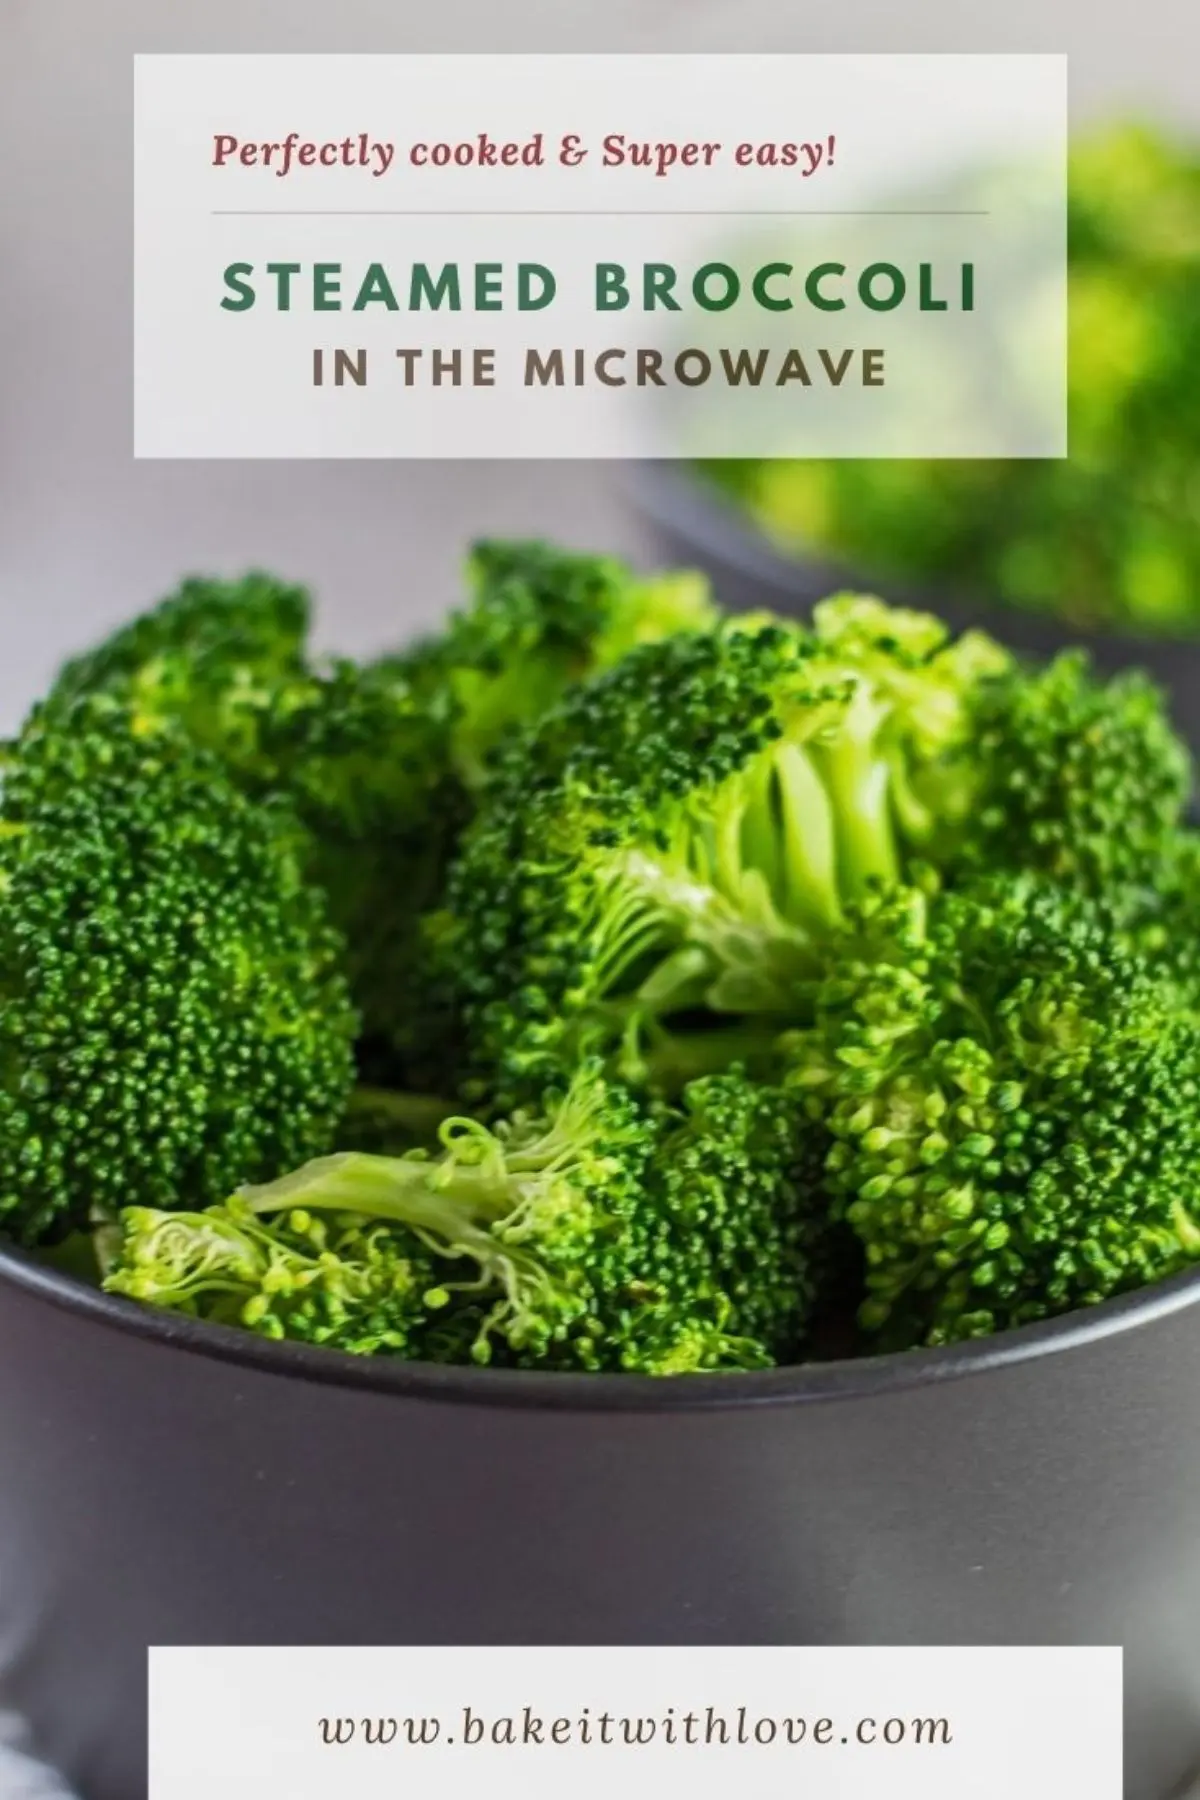 Pin with microwave steamed broccoli and text overlay.